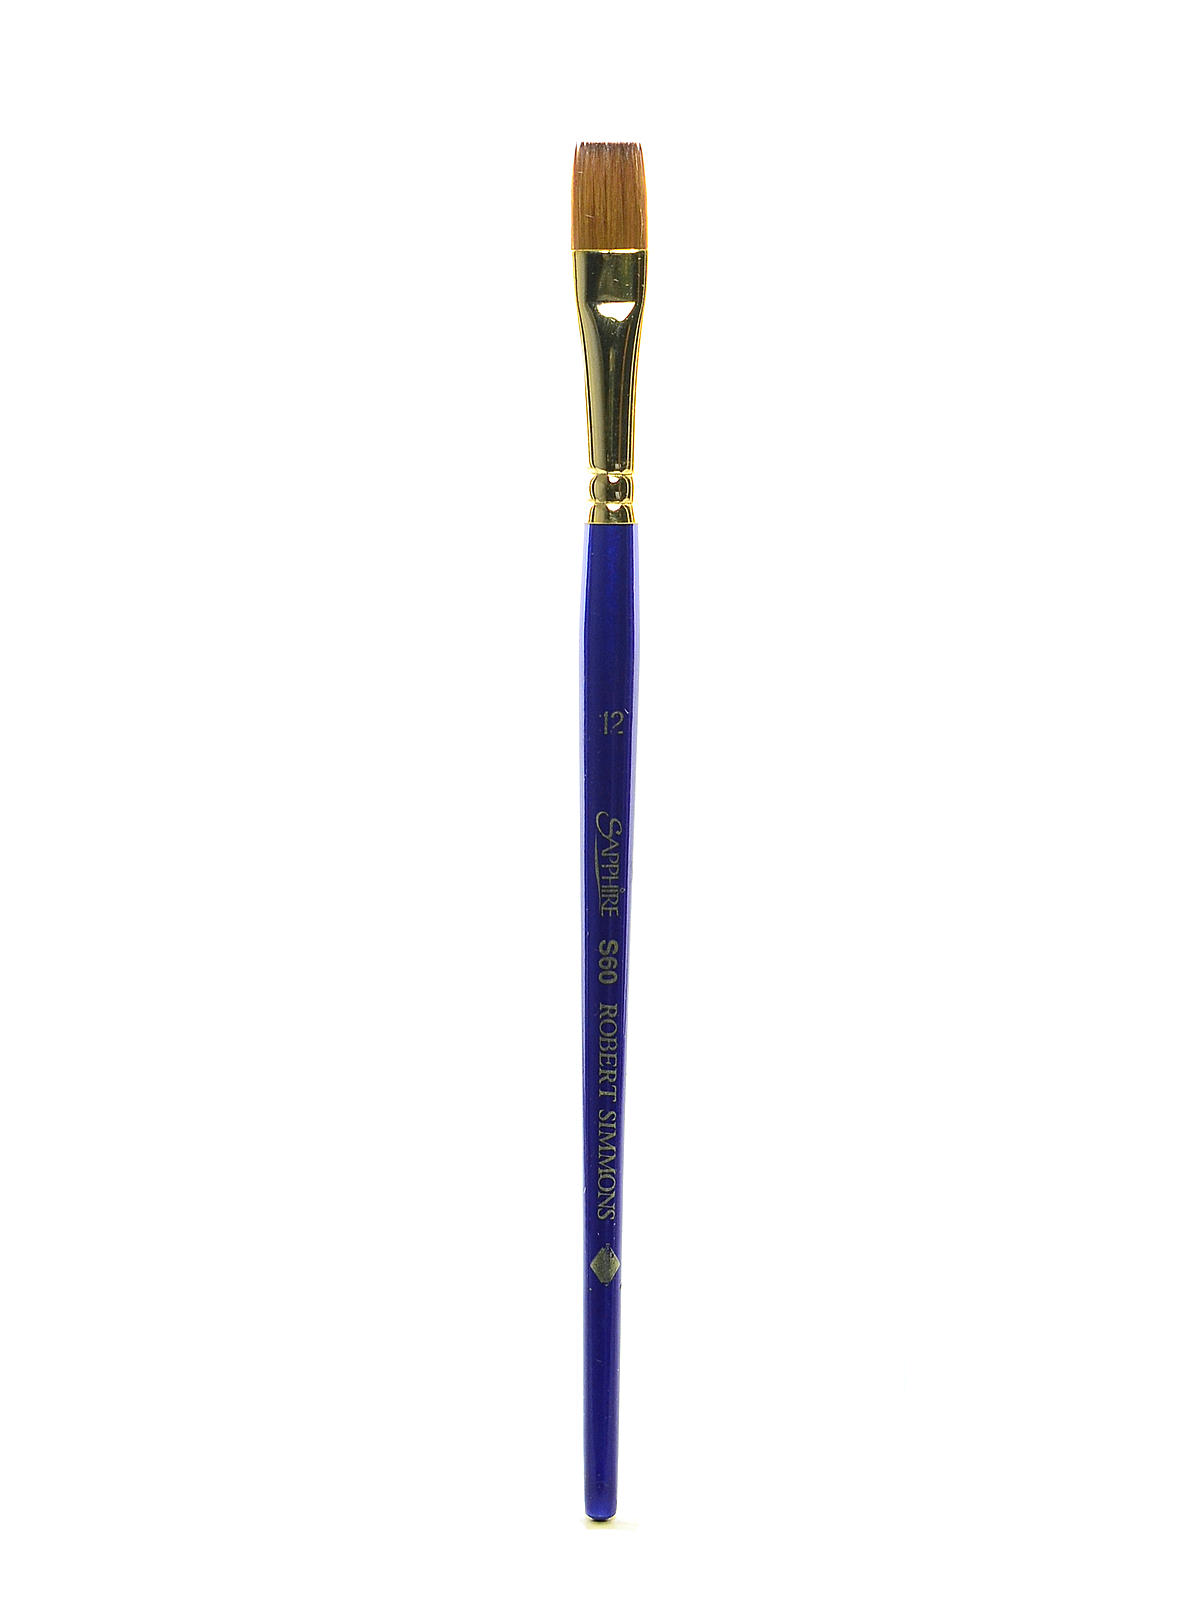 Sapphire Series Synthetic Brushes Short Handle 12 Shader S60